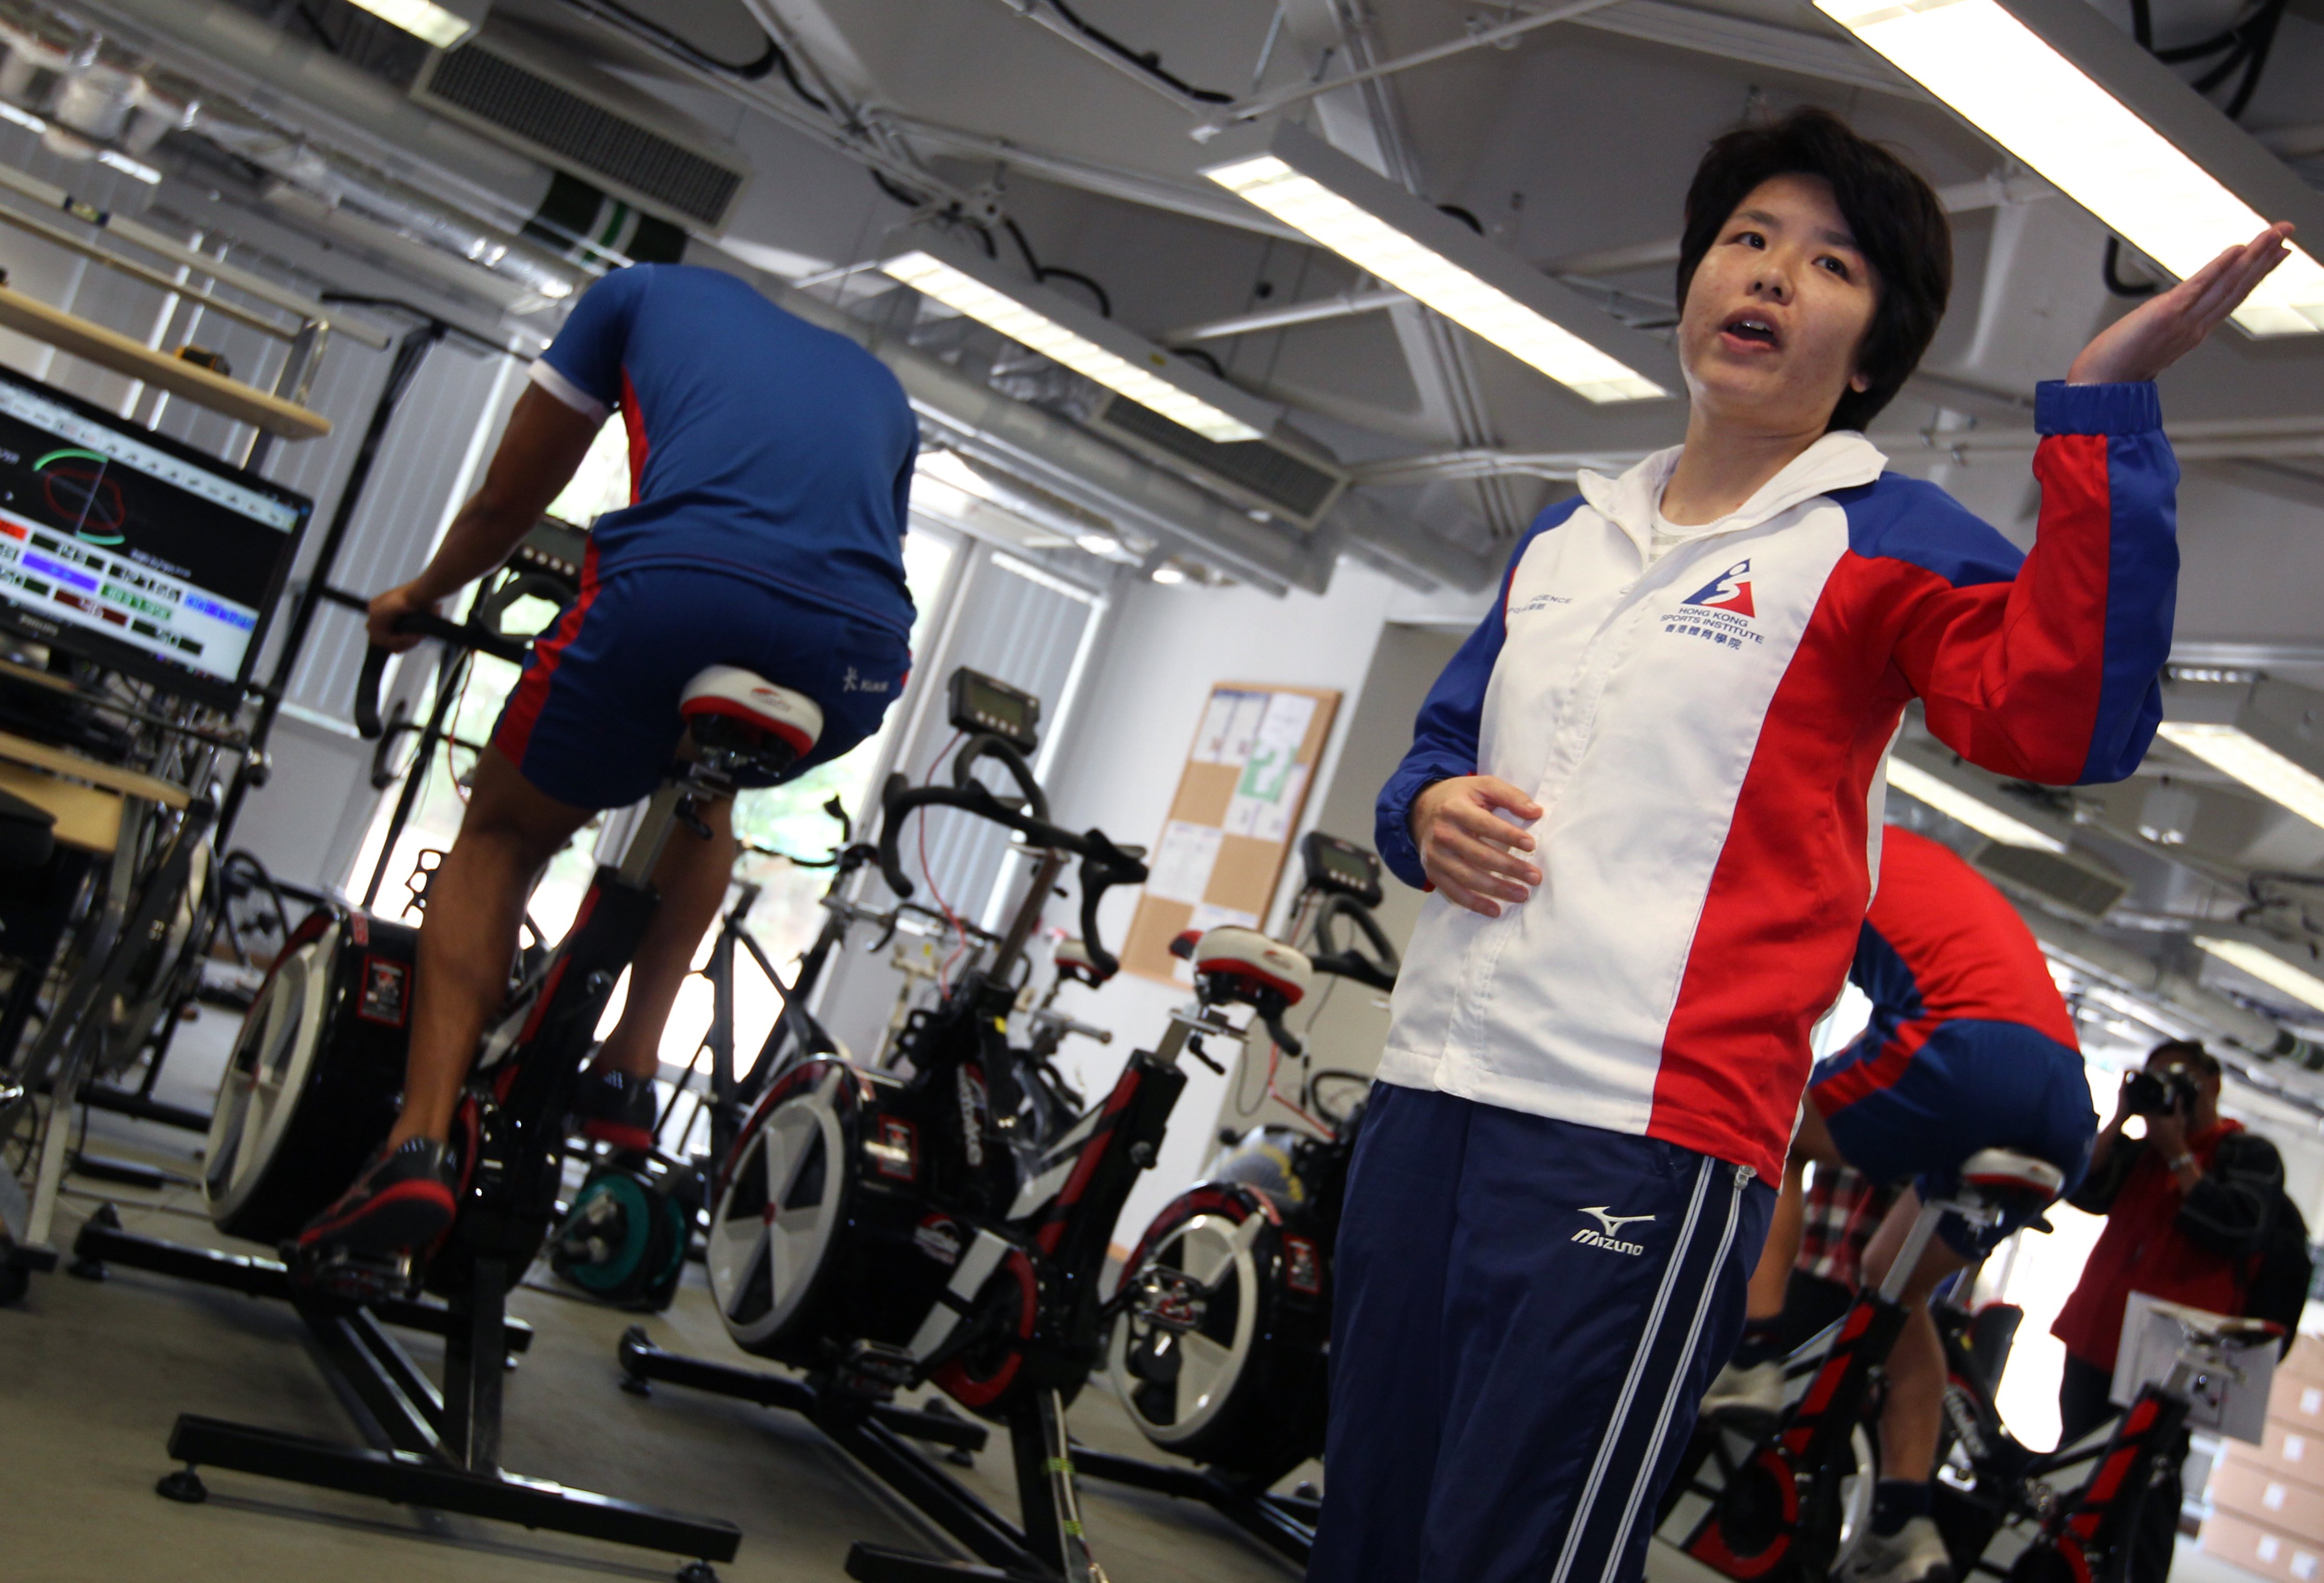 The Hong Kong Sports Institute might be doing a reasonable job of training athletes but is lacking in audit mechanisms, according to the government auditor. Photo: Nora Tam